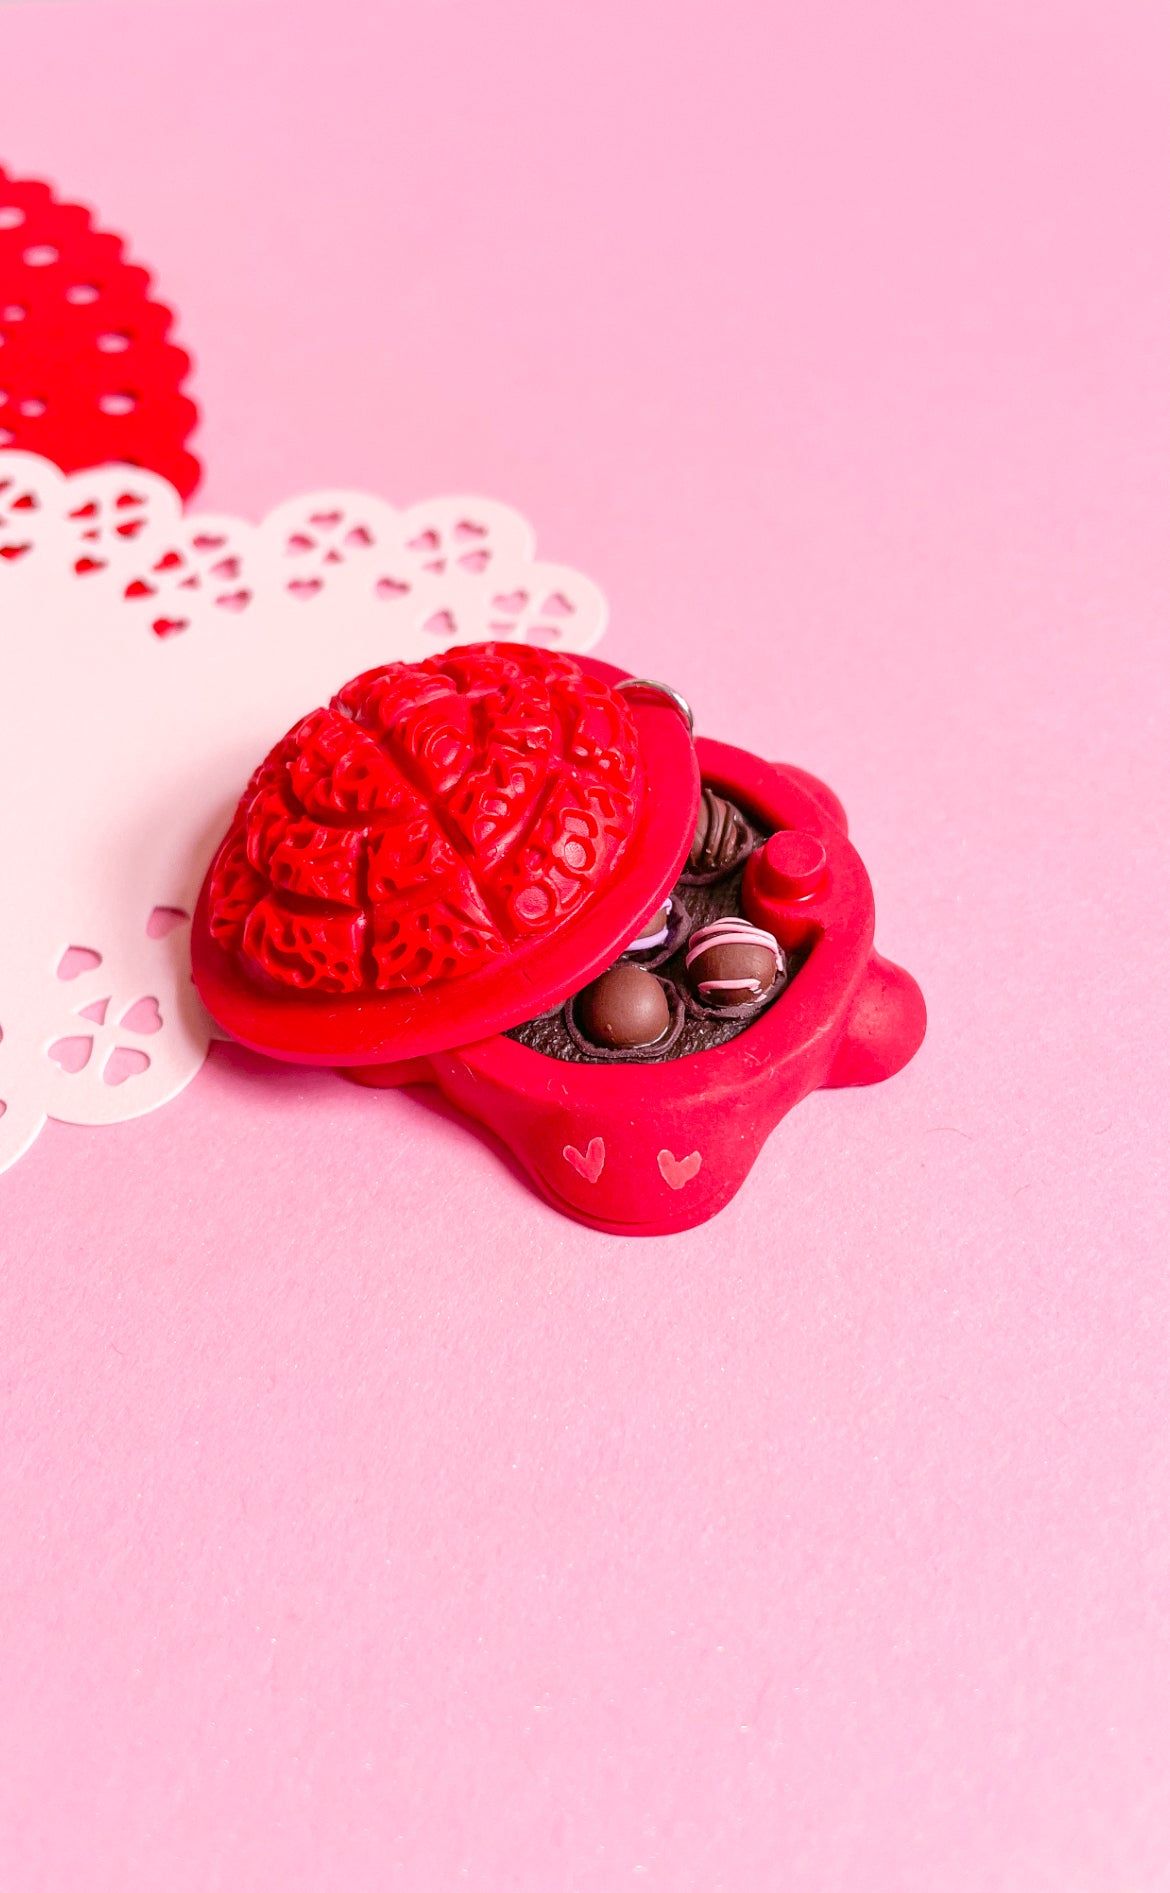 A red heart shaped box with chocolates inside - Oreo